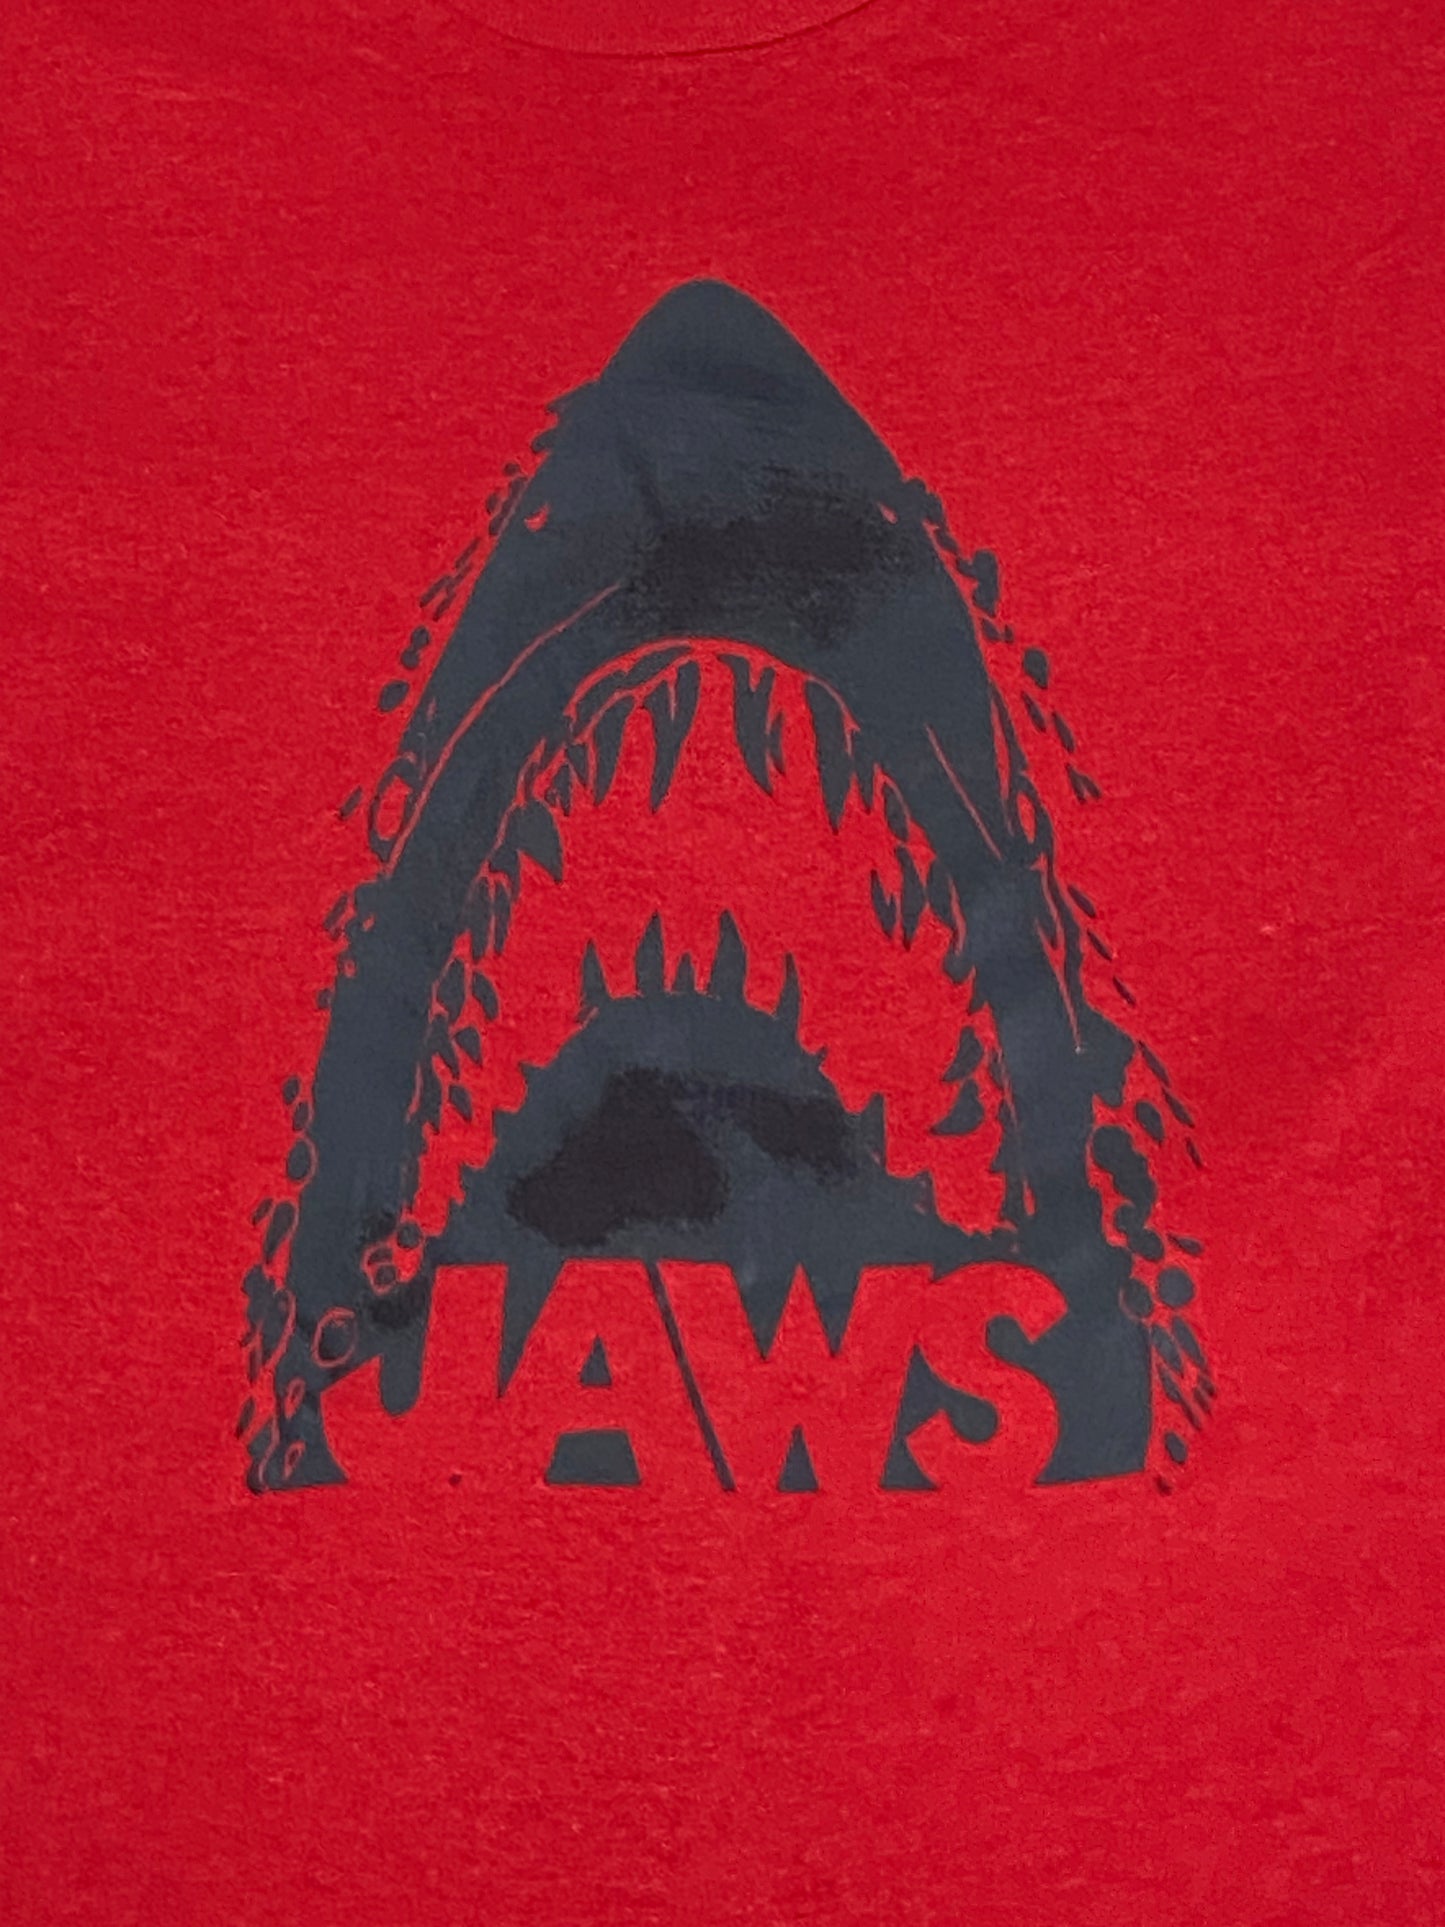 1970’s Jaw’s T-Shirt